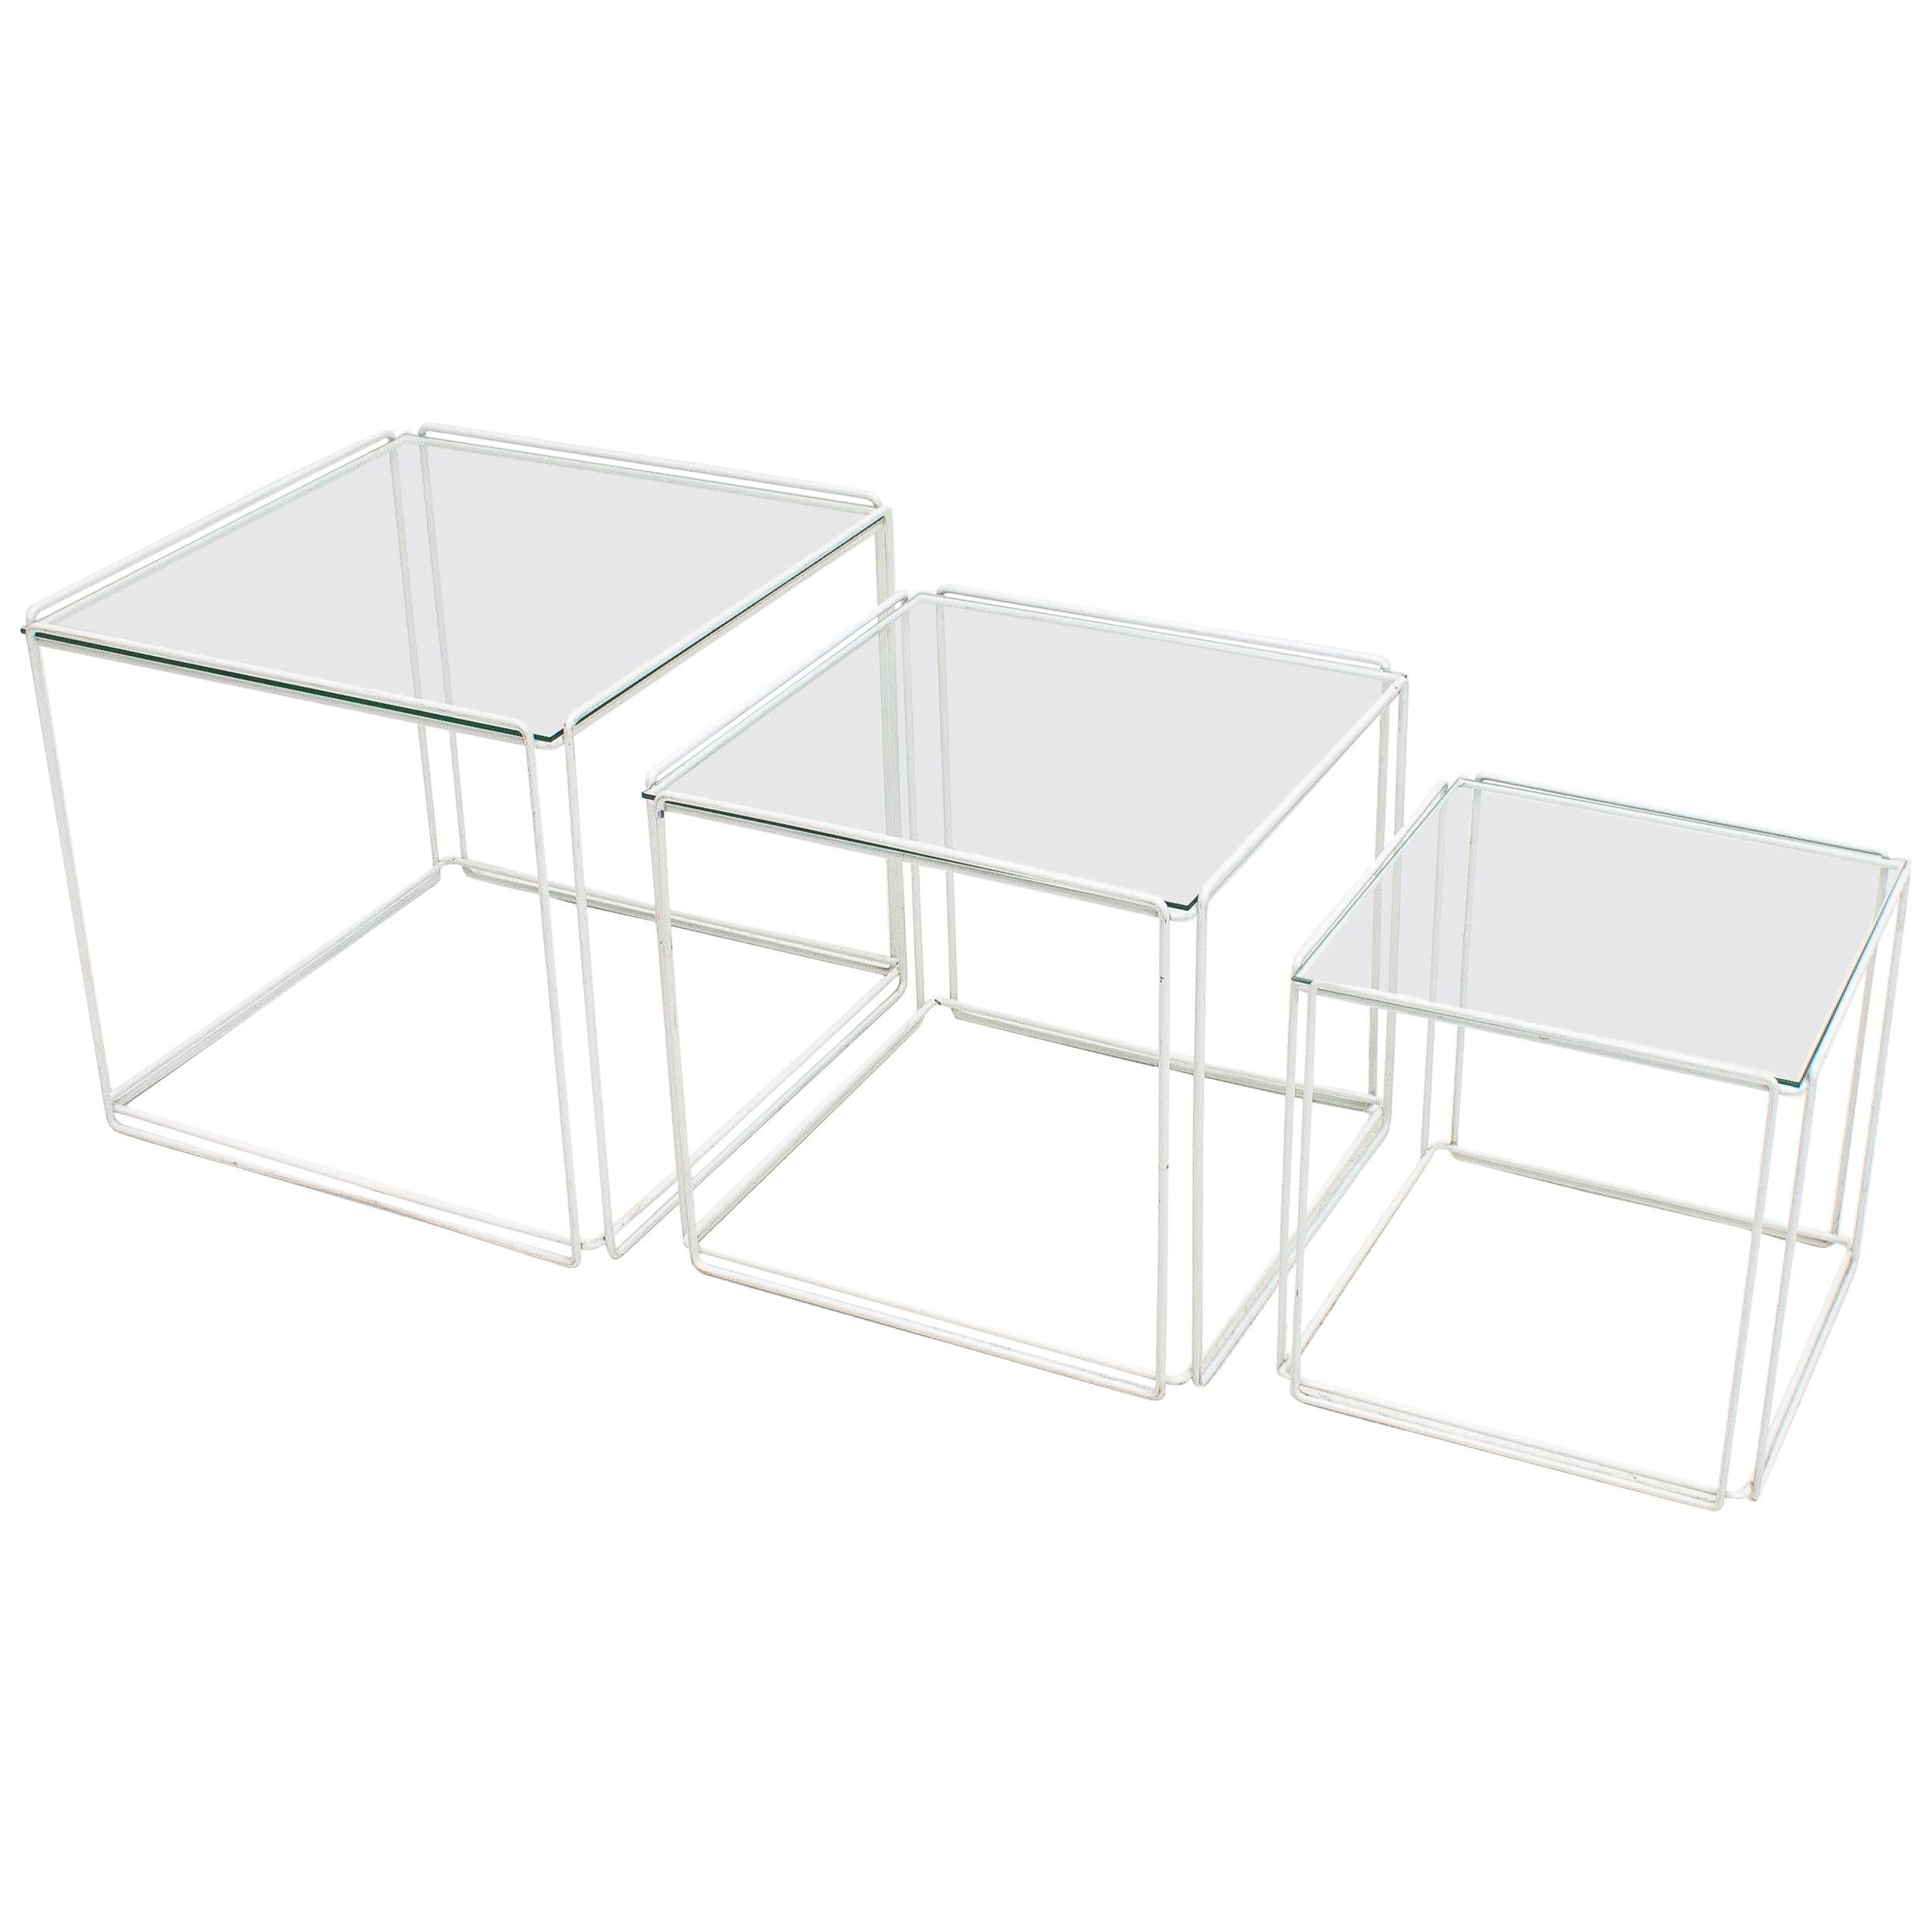 Set of White 'Isoceles' Glass Top Nesting Tables Designed by Max Sauze, 1970s